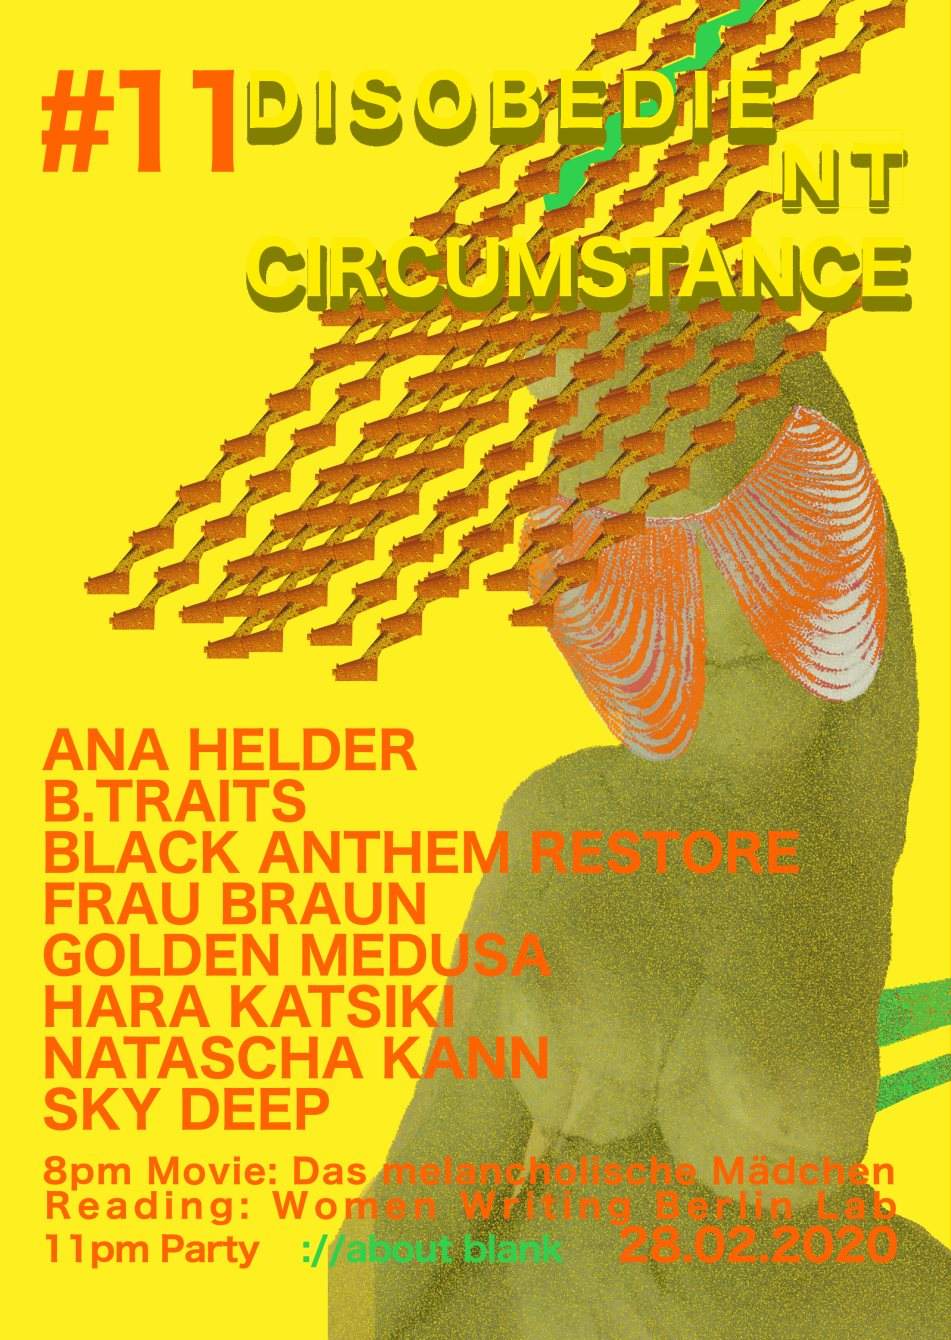 Disobedient Circumstance #11 - Flyer front